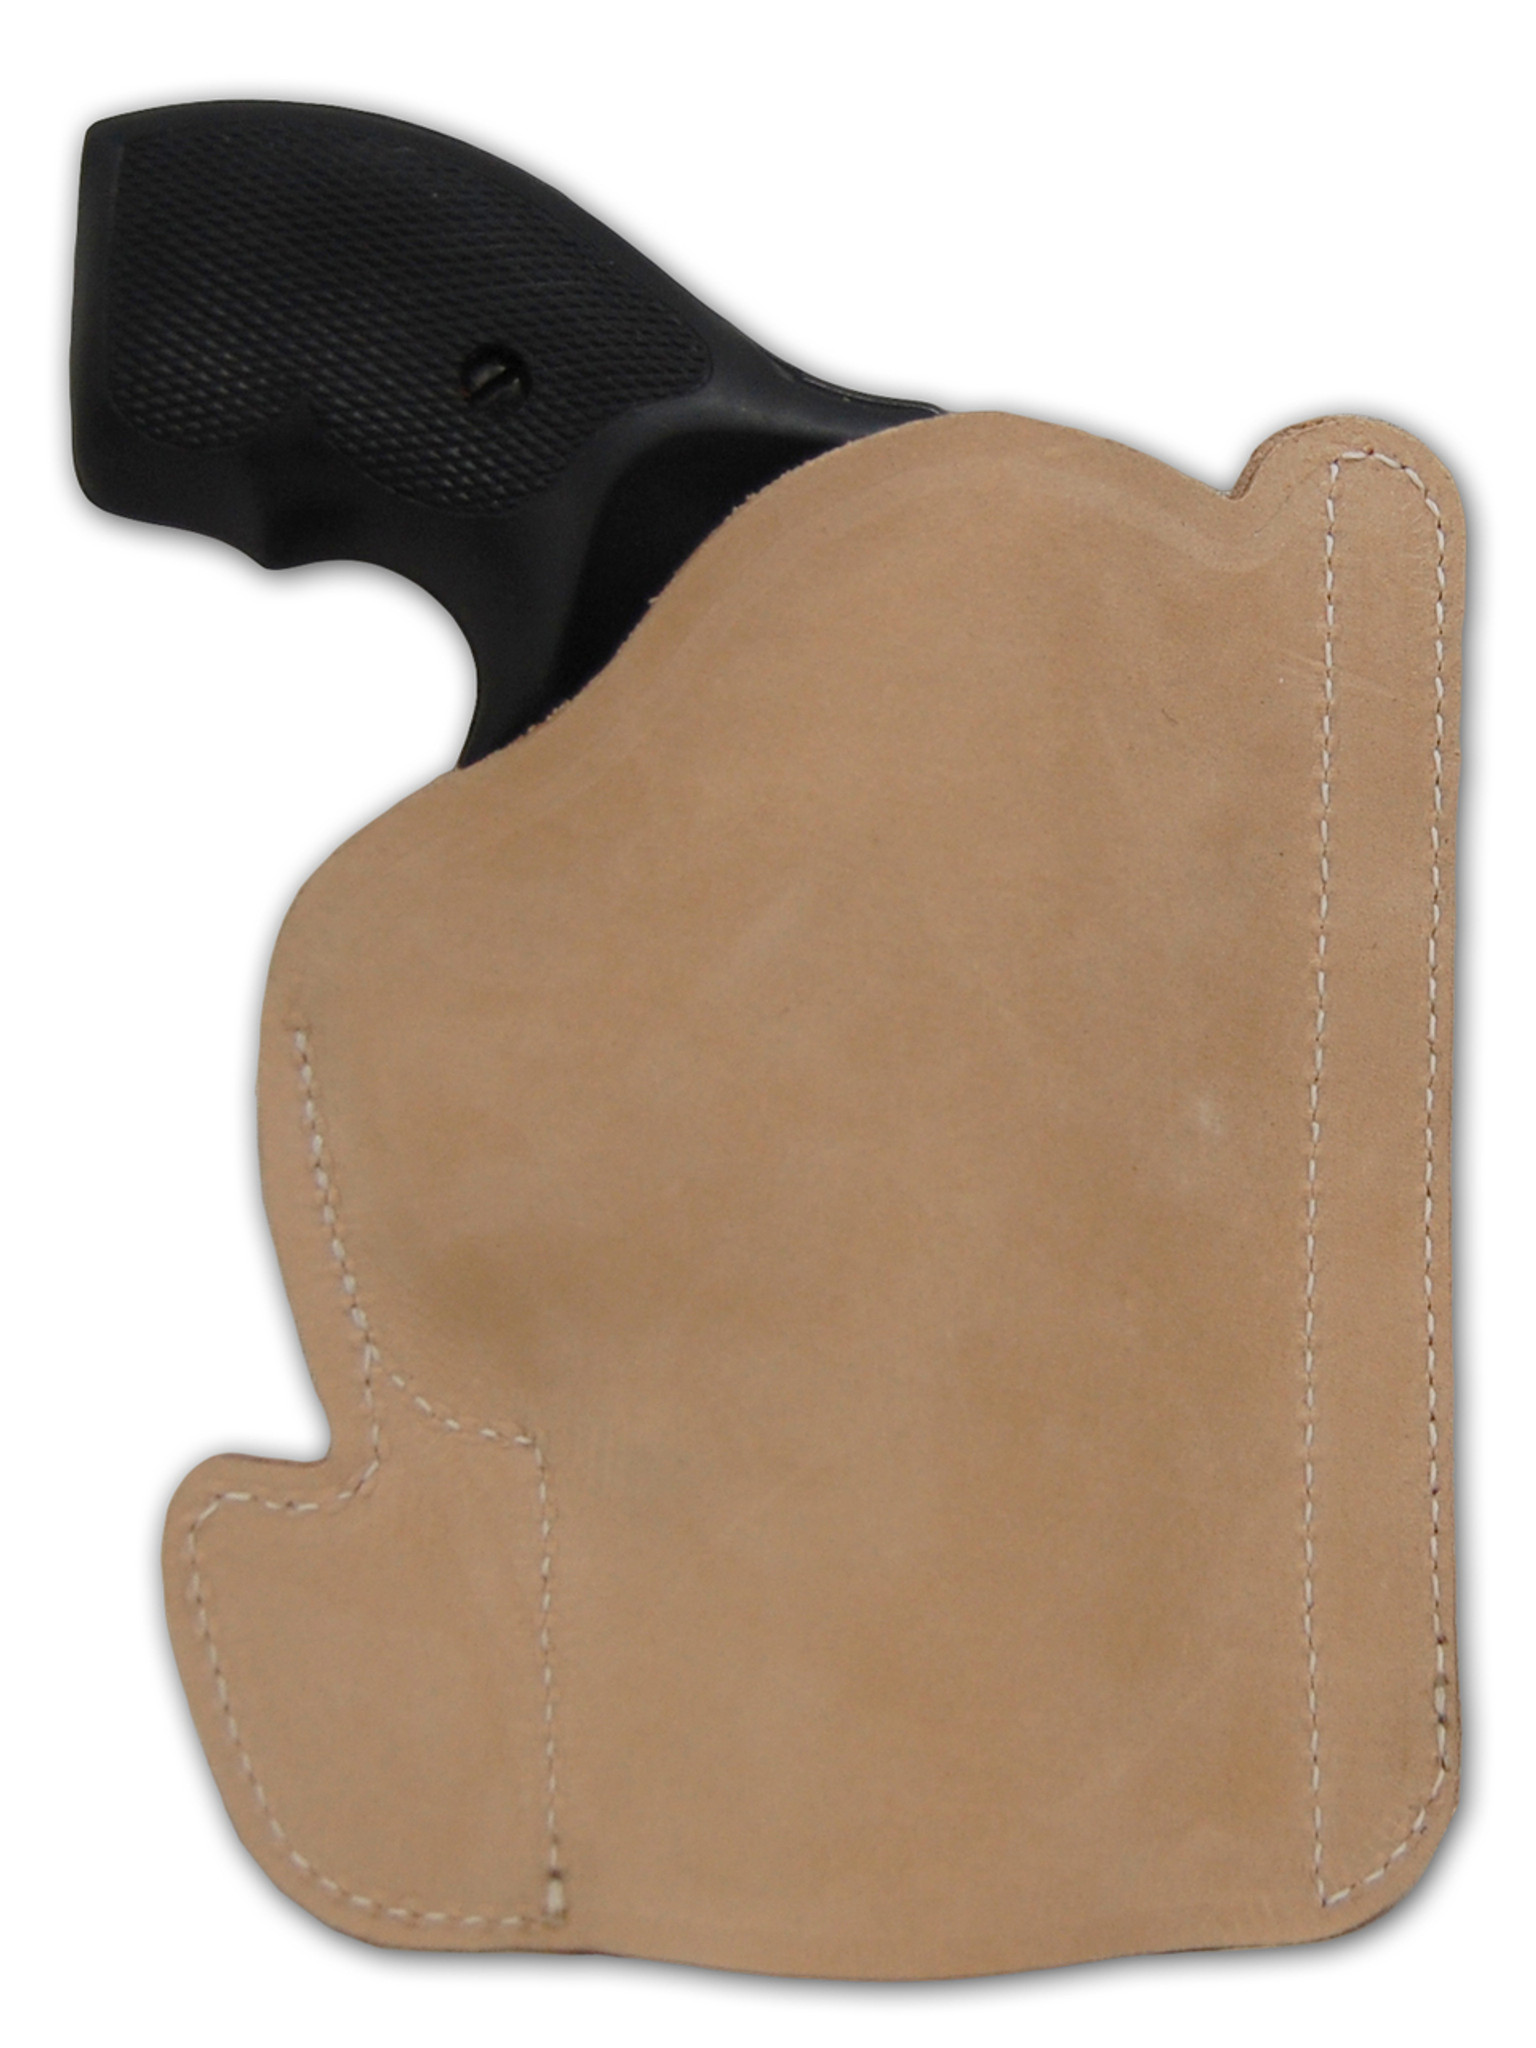 Light Brown Leather Pocket Organizer - Barsony Holsters